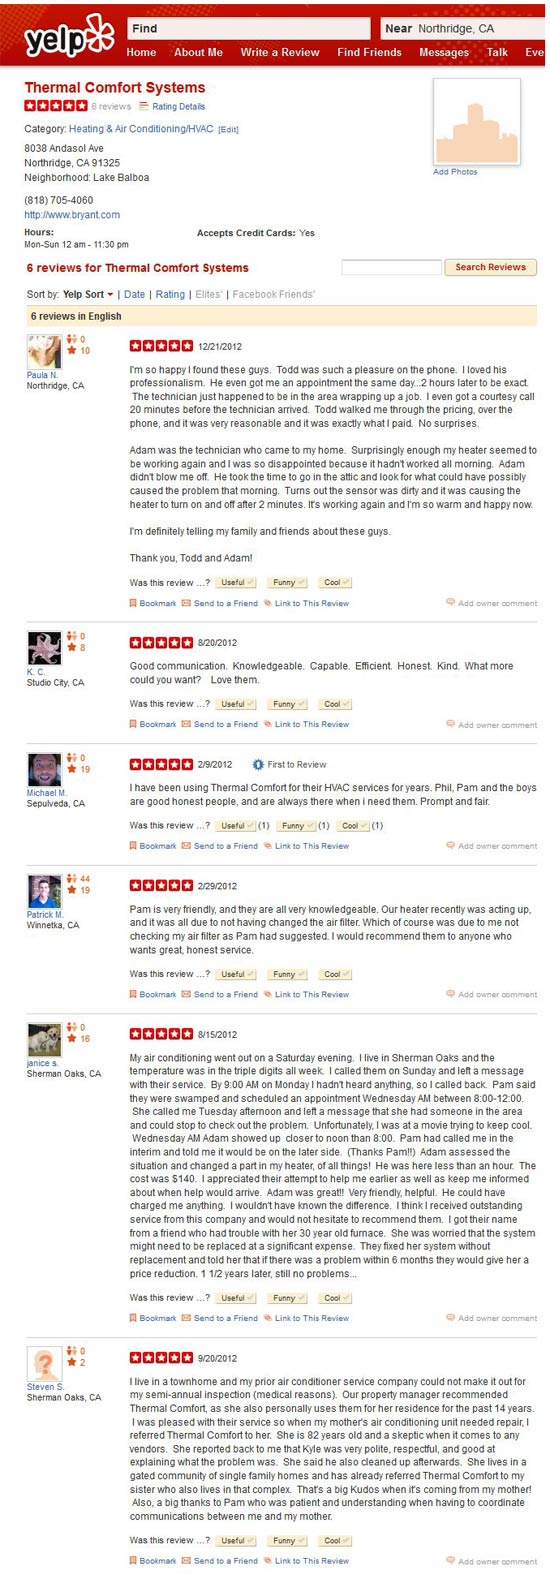 Yelp Reviews for Thermal Comfort Systems